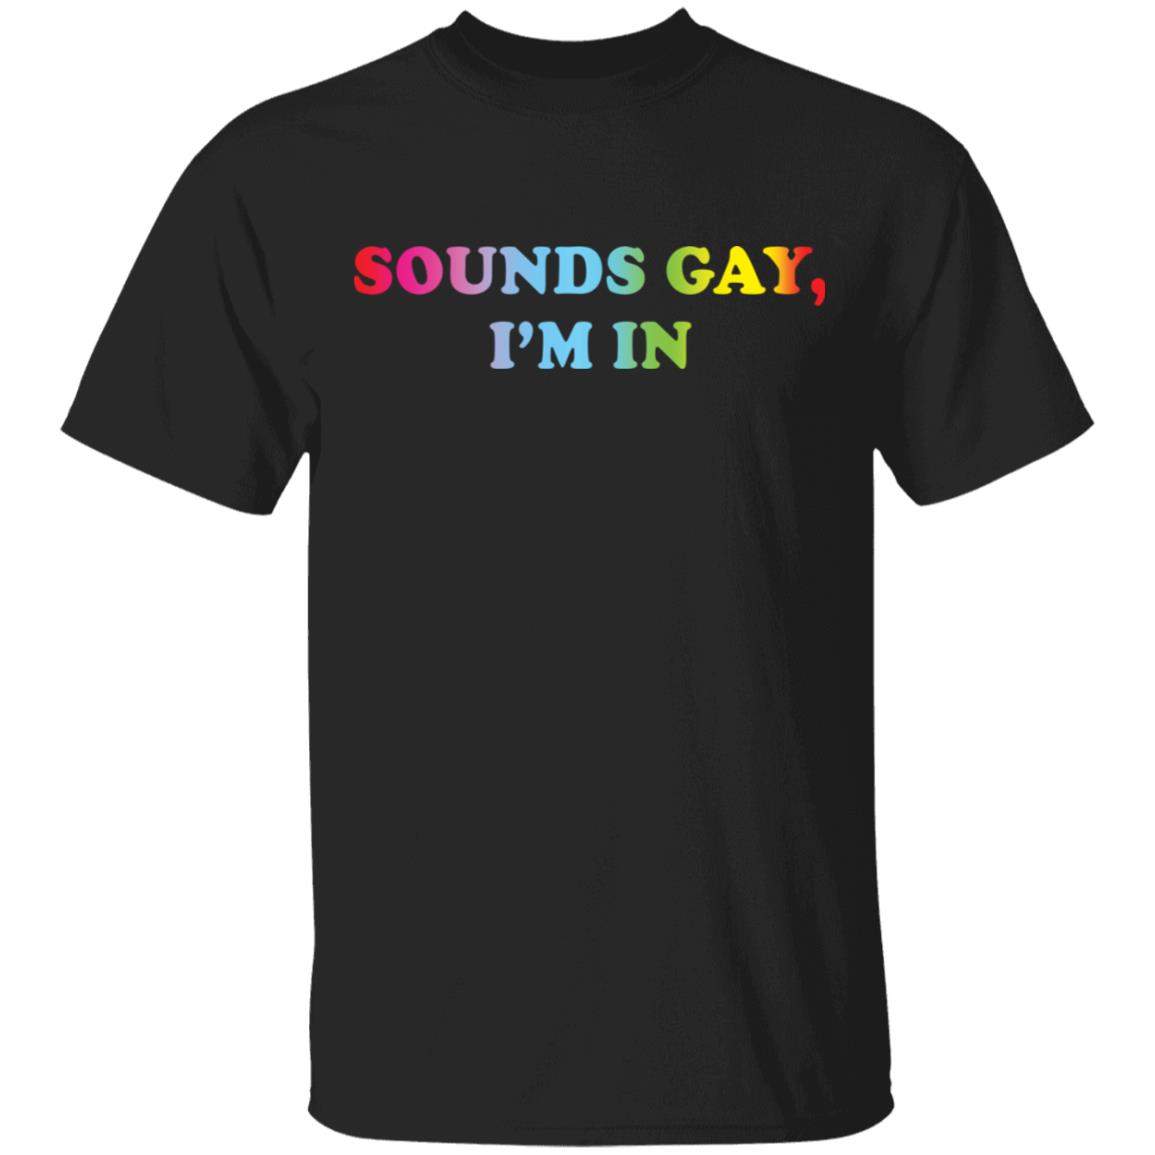 Sounds gay i'm in shirt - Rockatee